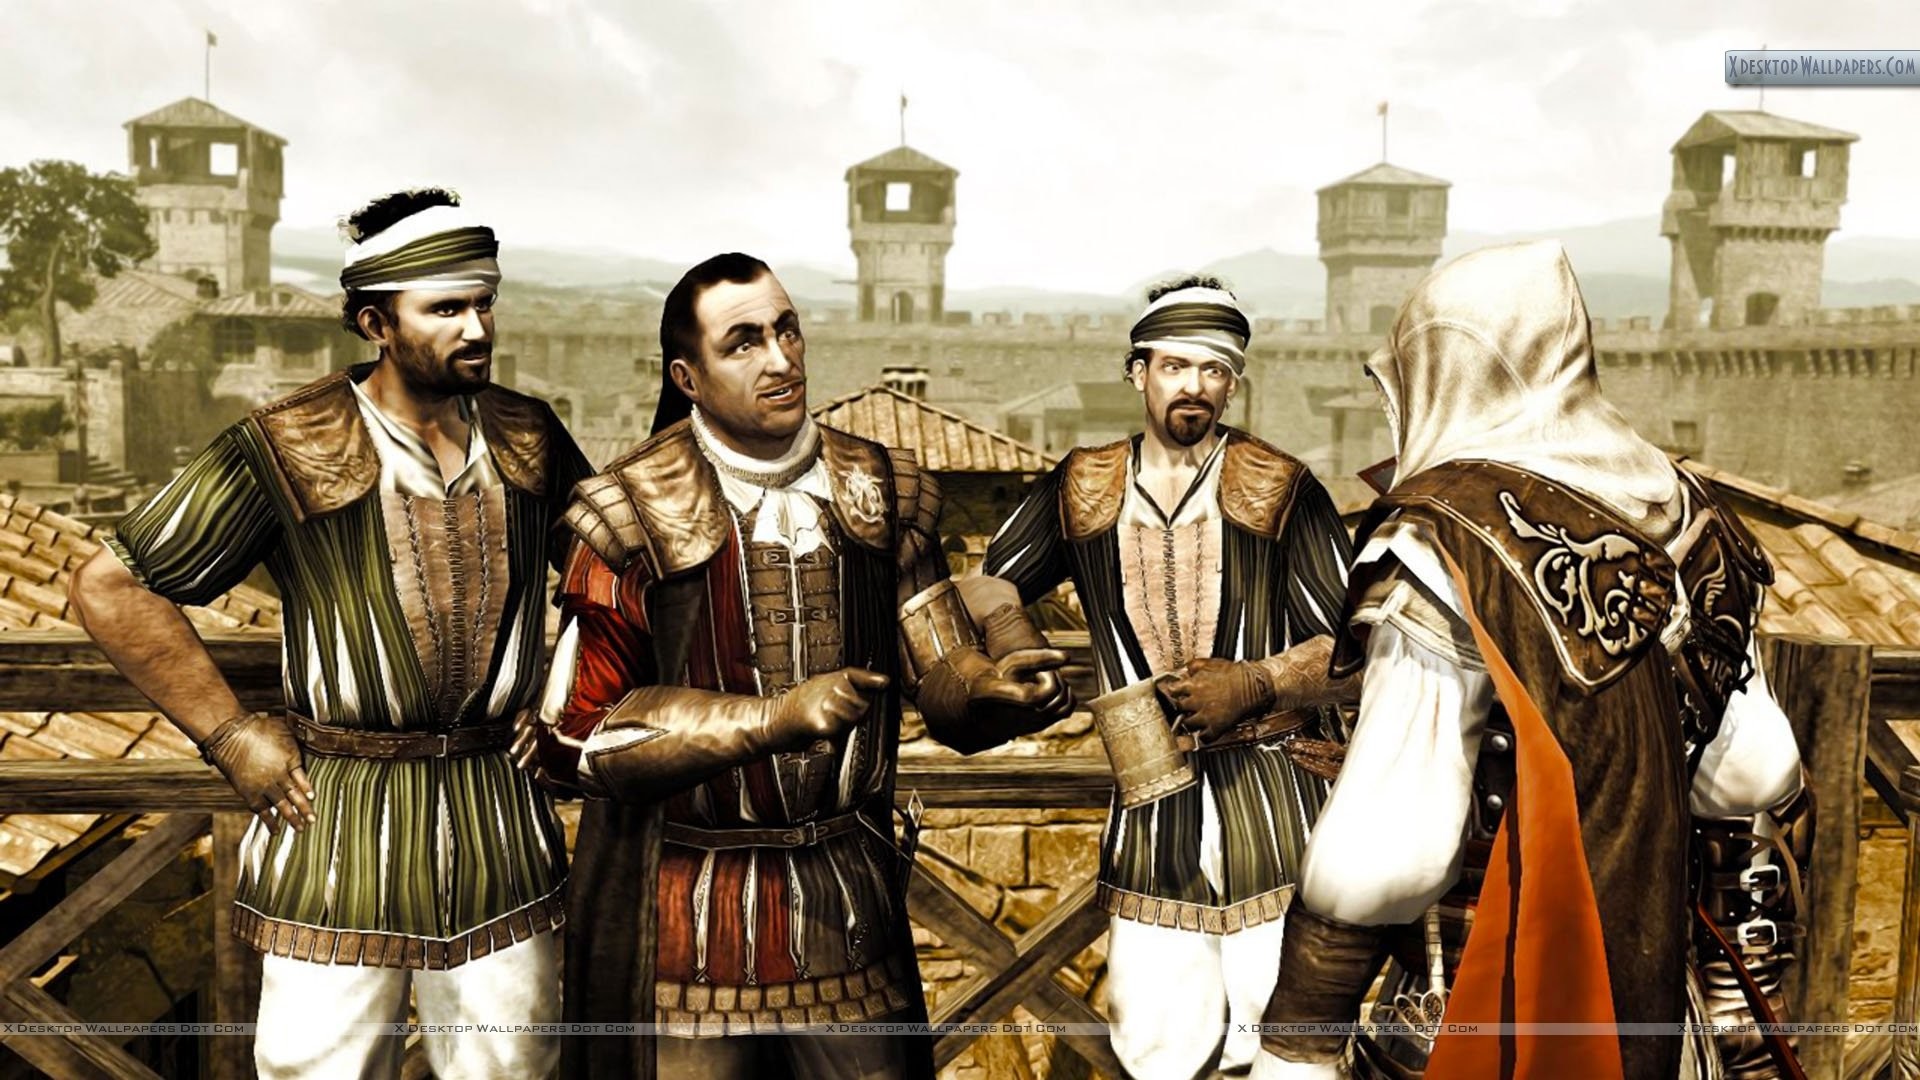 Games assassin creed 2. Assassin's Creed 2. Assassin’s Creed II: Brotherhood – 2010. Assassin s Creed II: Discovery. Ассасин Крид 2 Дискавер.